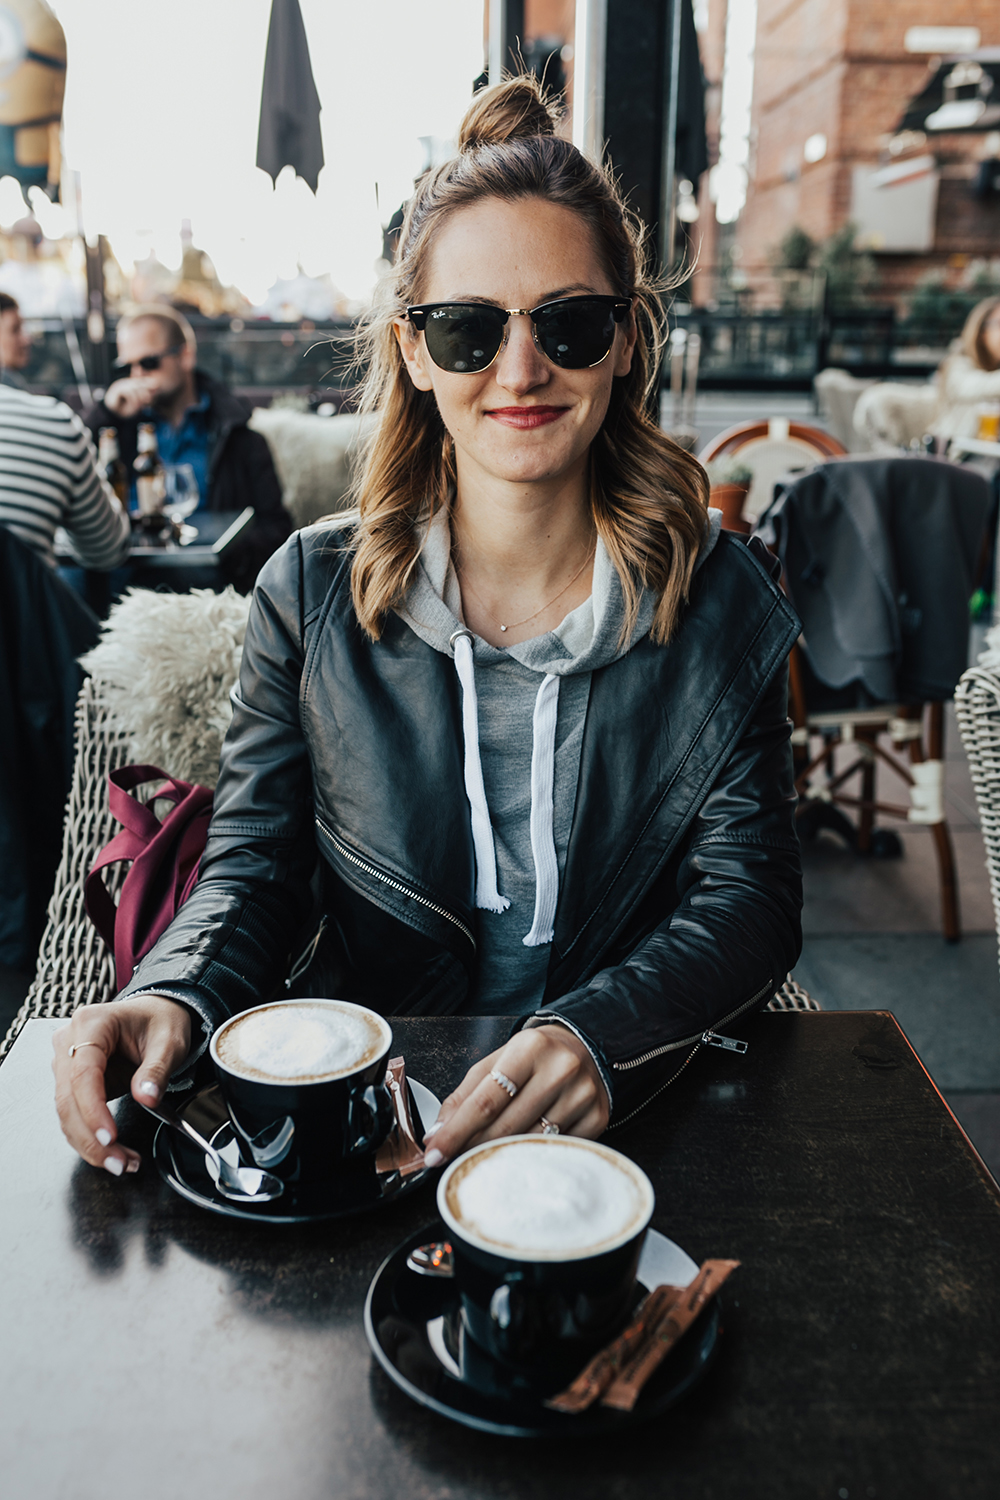 livvyland-blog-olivia-watson-fashion-travel-blogger-princess-cruises-scandinavia-what-to-wear-pack-oslo-norway-cafe-cappuccino-coffee-shop